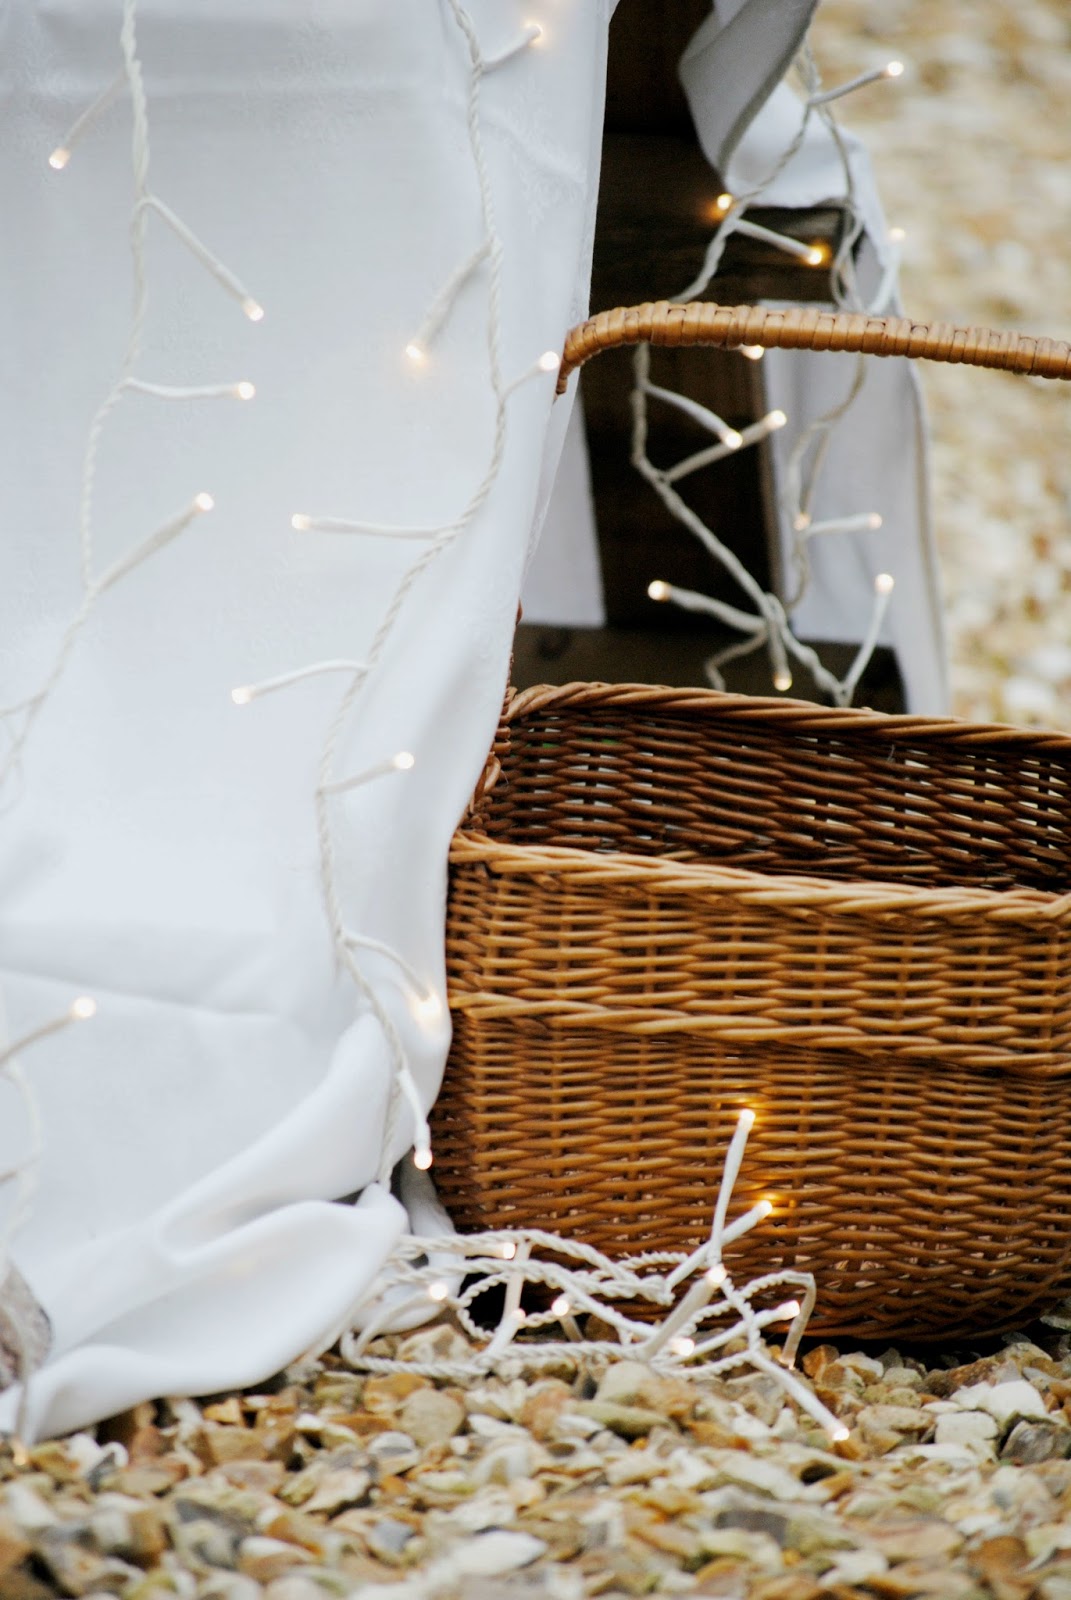 personalised gift ijustloveit.co.uk photography shoot location picnic fairy lights lifestyle wicker basket flame candle prosecco